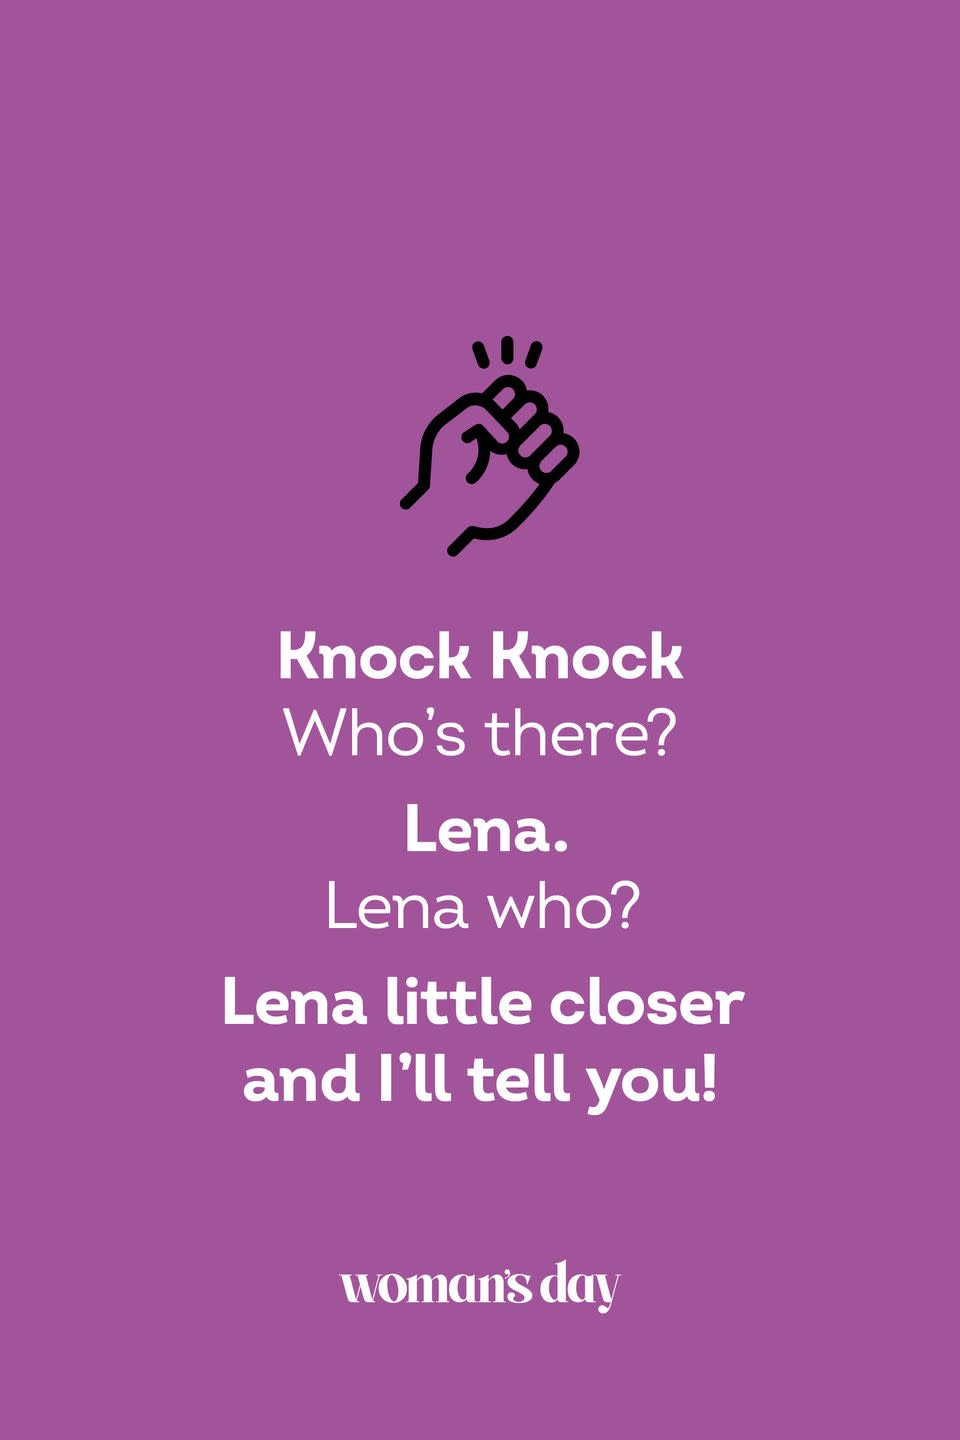 <p><strong>Knock Knock.</strong></p><p><em>Who’s there?</em></p><p><strong>Lena.</strong></p><p><em>Lena who?</em></p><p><strong>Lena little closer and I’ll tell you!</strong></p>